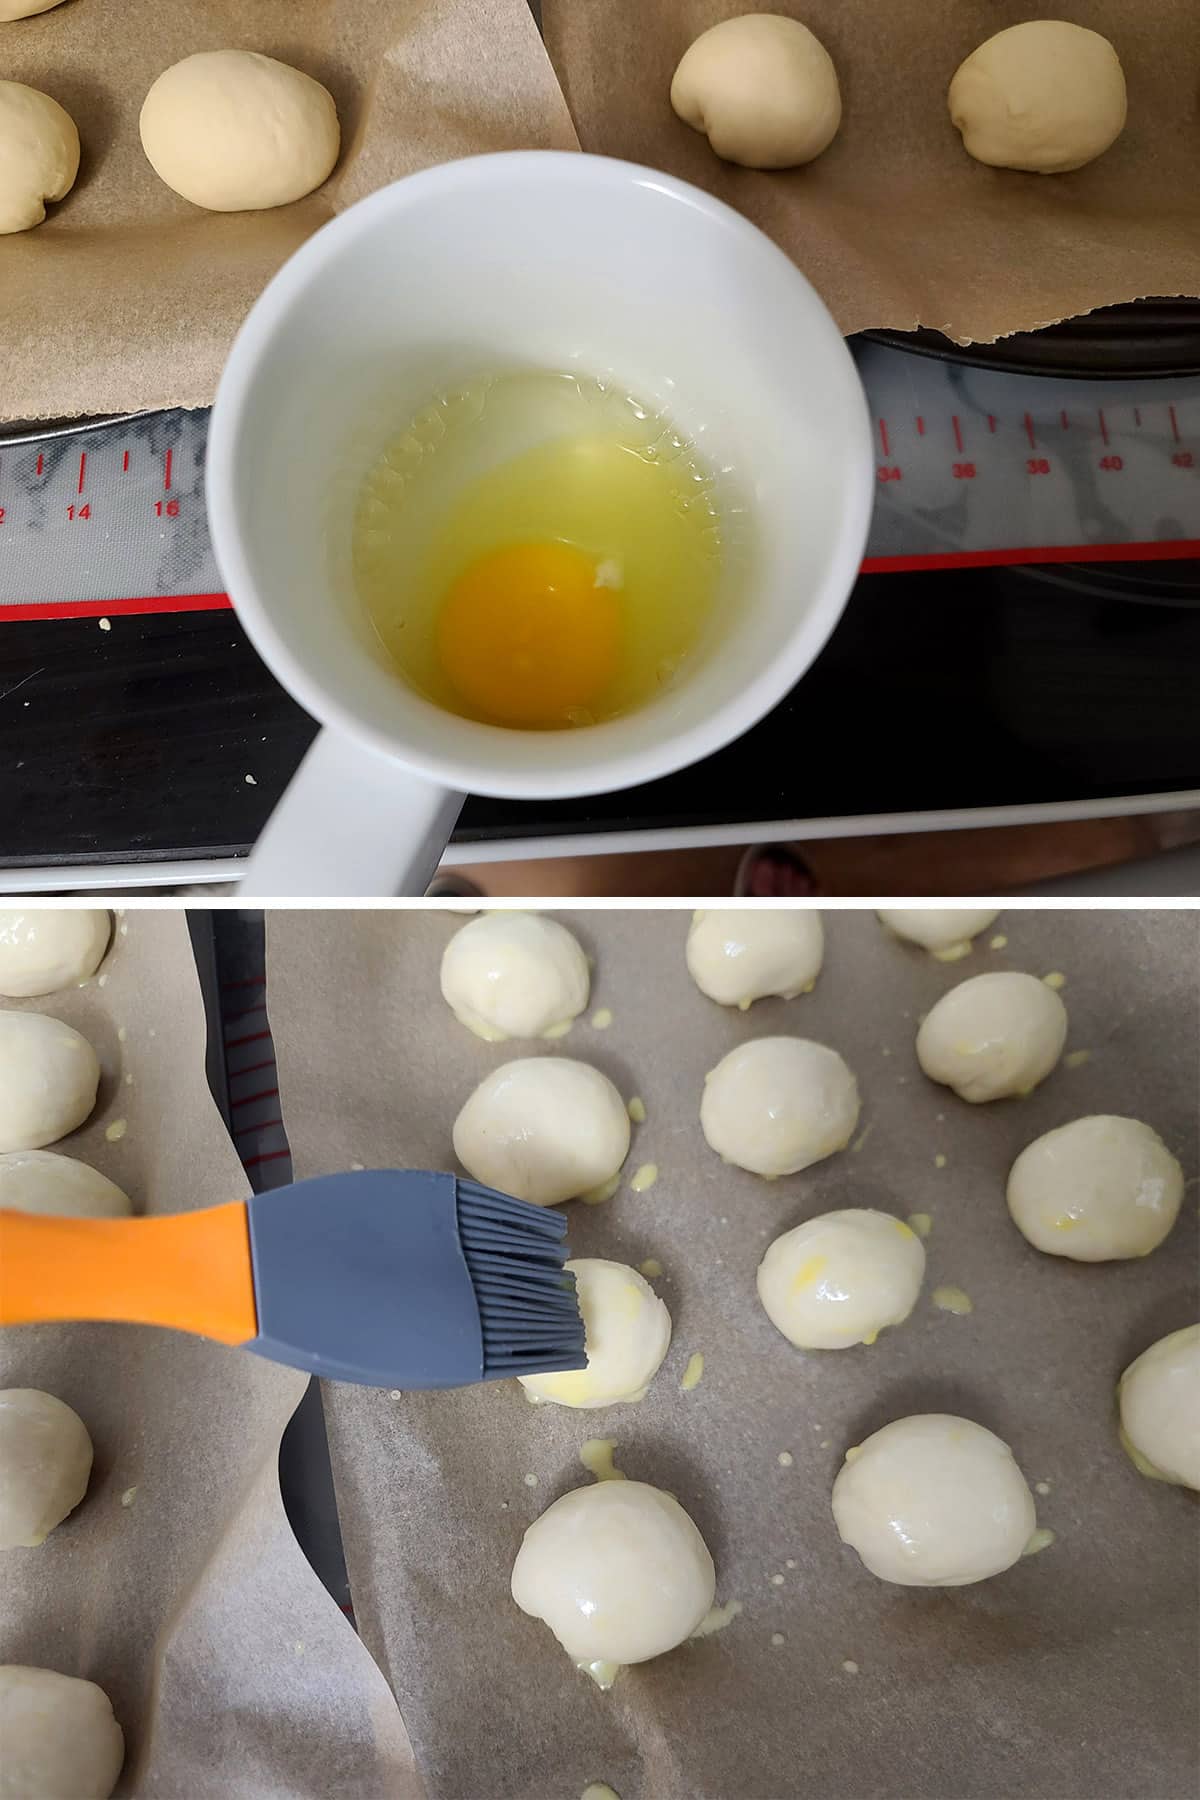 A 2 part image showing the egg wash being mixed in a mug and brushed over the dough balls.